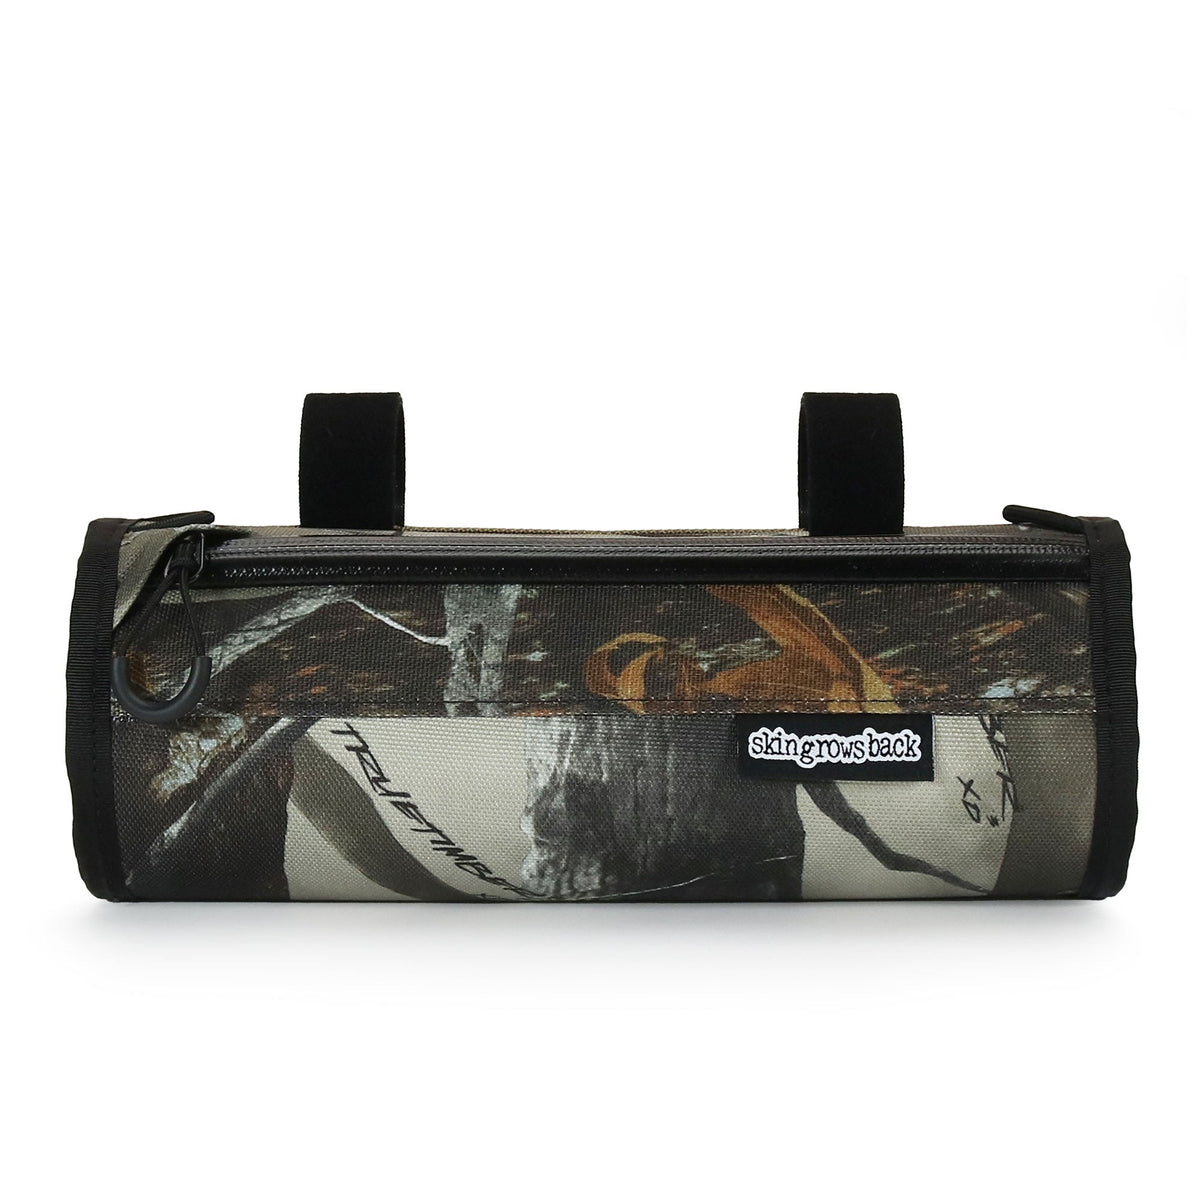 skingrowsback little lunch cycling handlebar bag forest